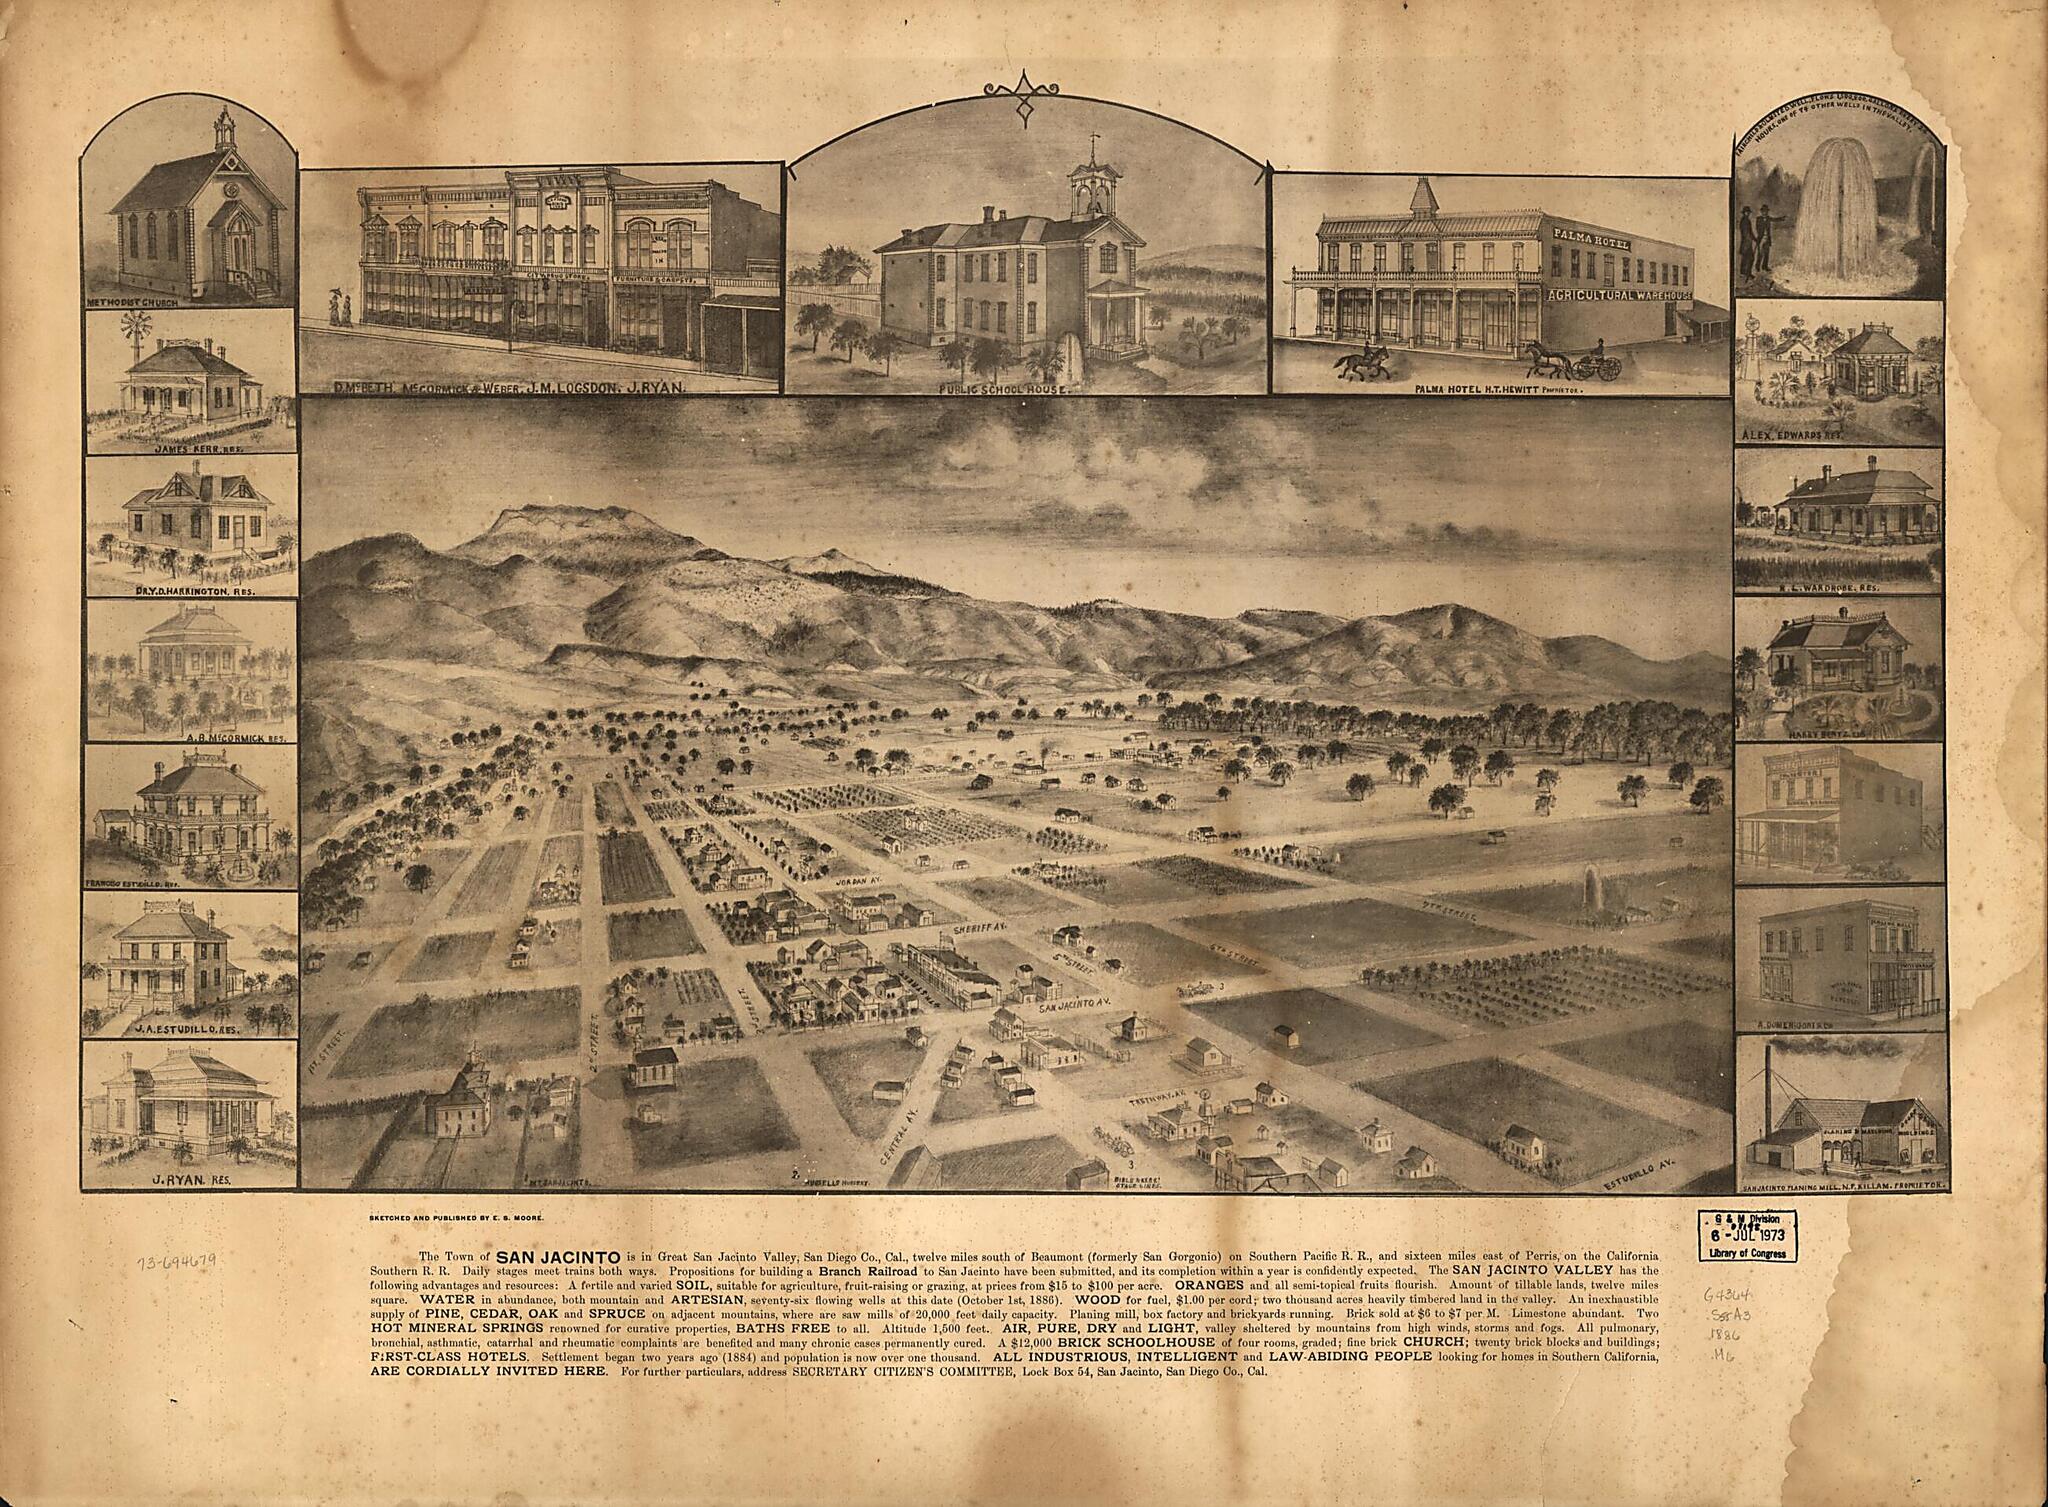 This old map of The Town of San Jacinto Is In Great San Jacinto Valley, San Diego County,California, Twelve Miles South of Beaumont (formerly San Gorgonio) On Southern Pacific Railroad, and Sixteen Miles East of Perris, On the California Southern R.R fro